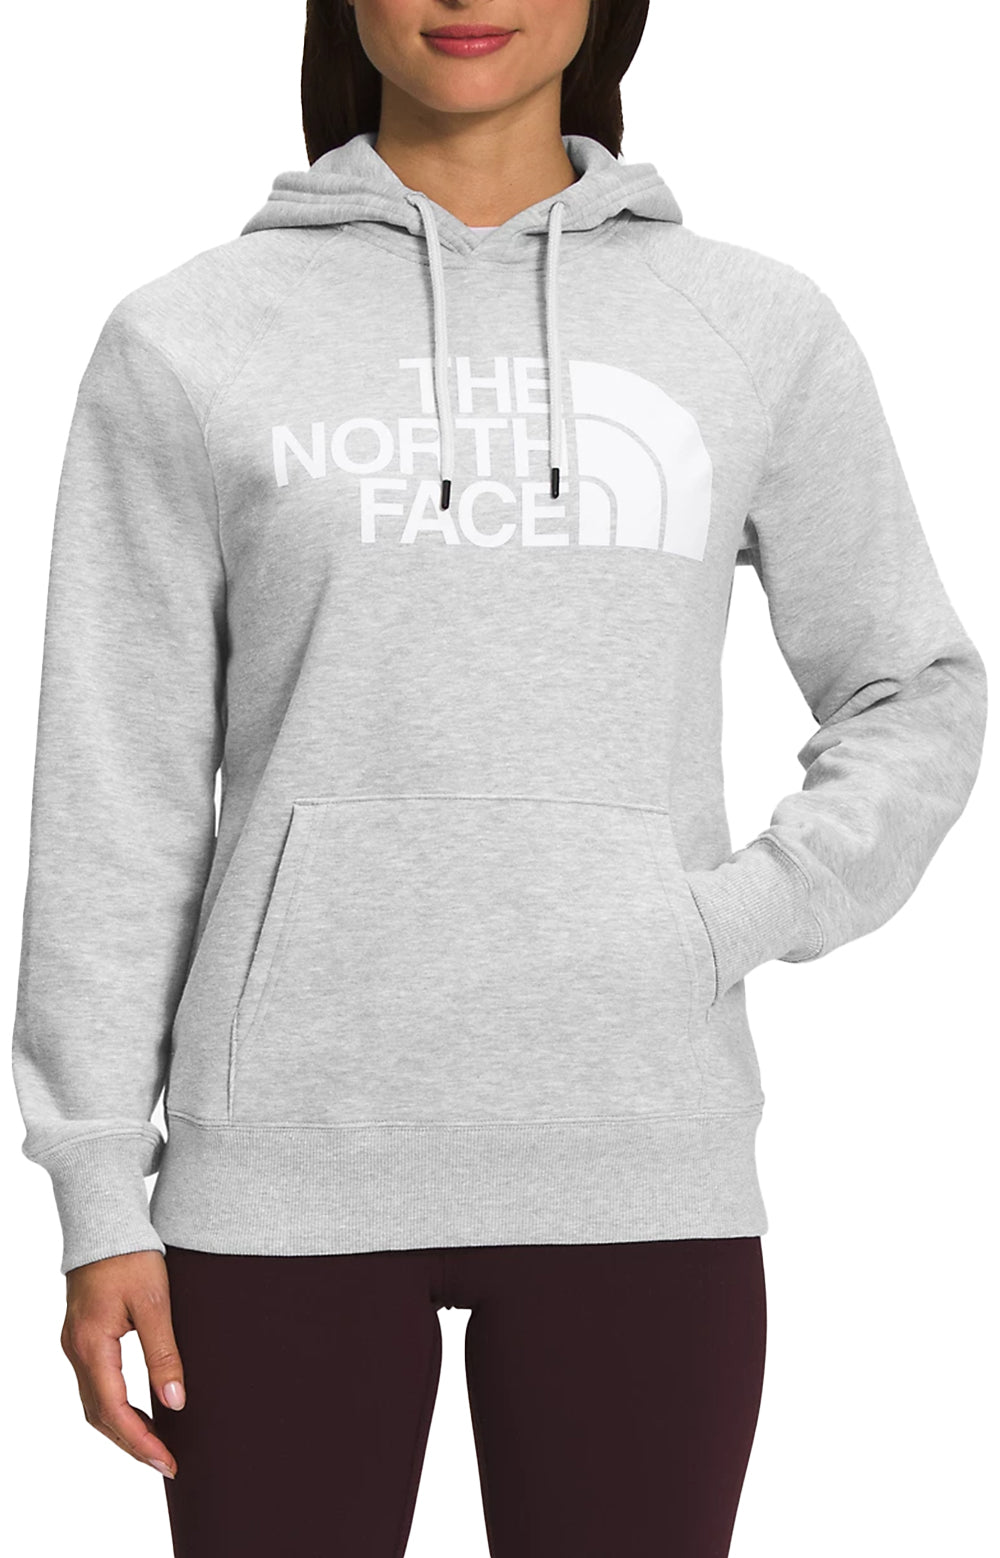 Half Dome Pullover Hoodie - TNG Light Grey Heather/TNF White